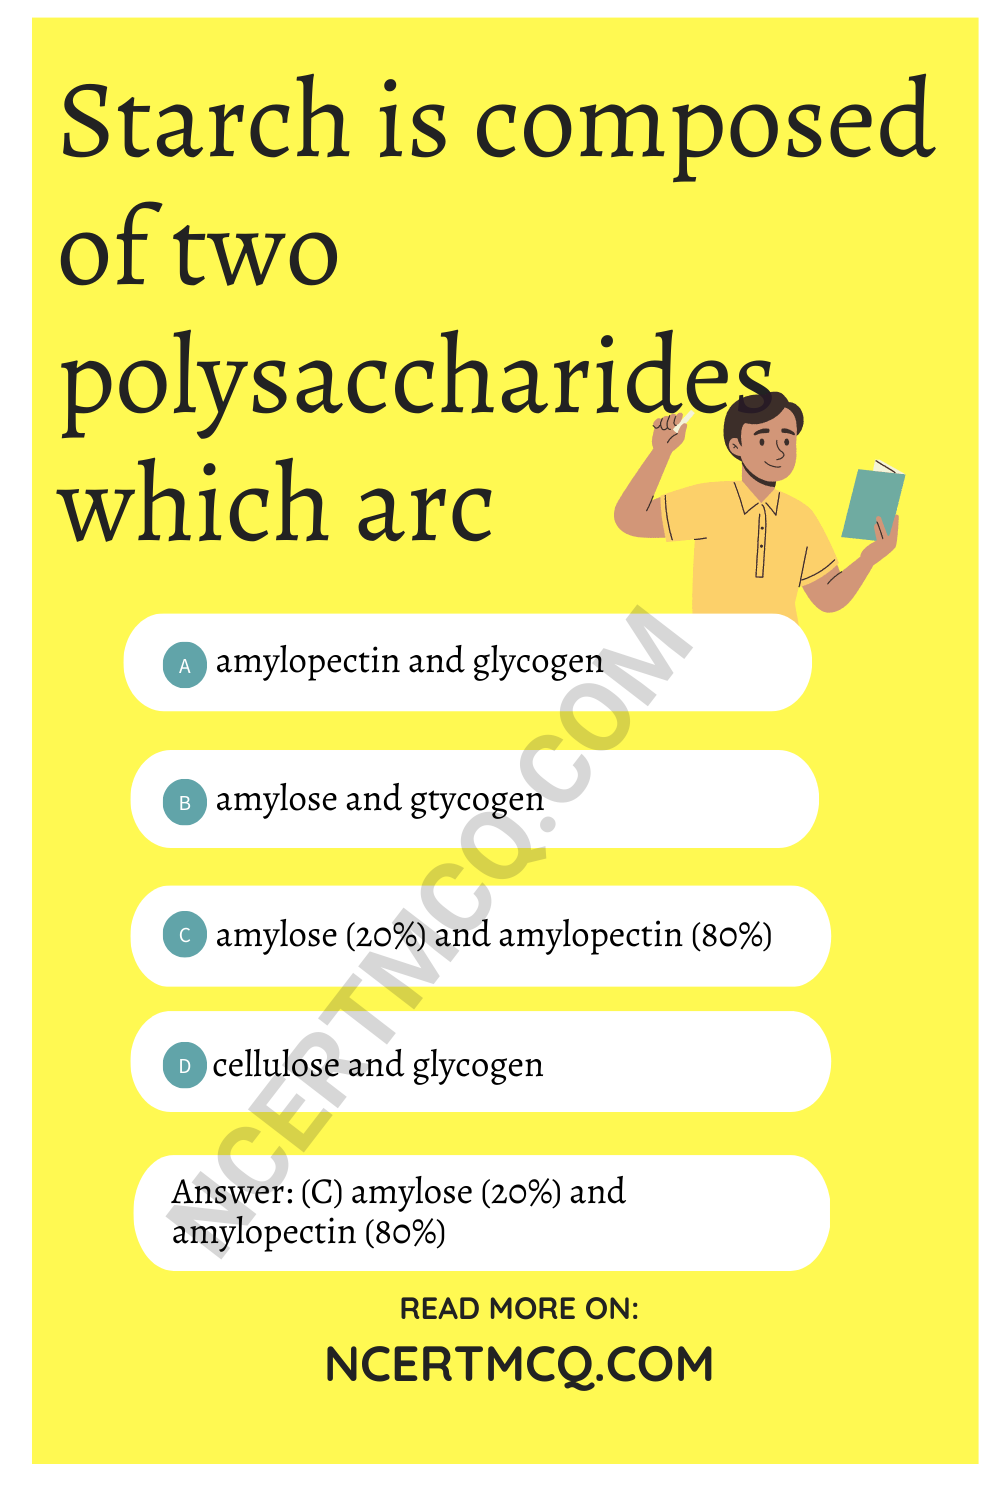 Starch is composed of two polysaccharides which arc